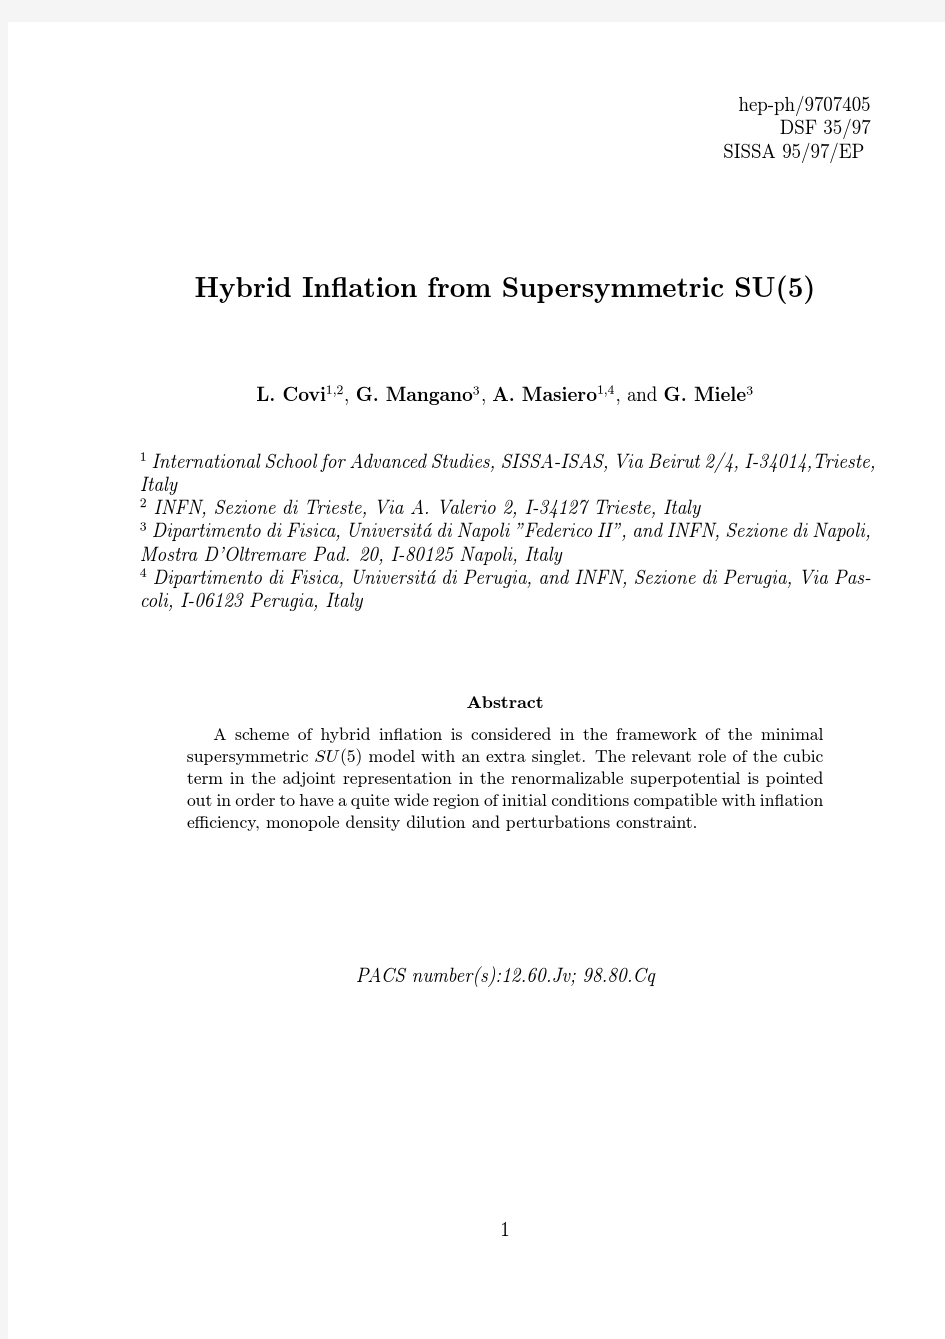 Hybrid Inflation from Supersymmetric SU(5)